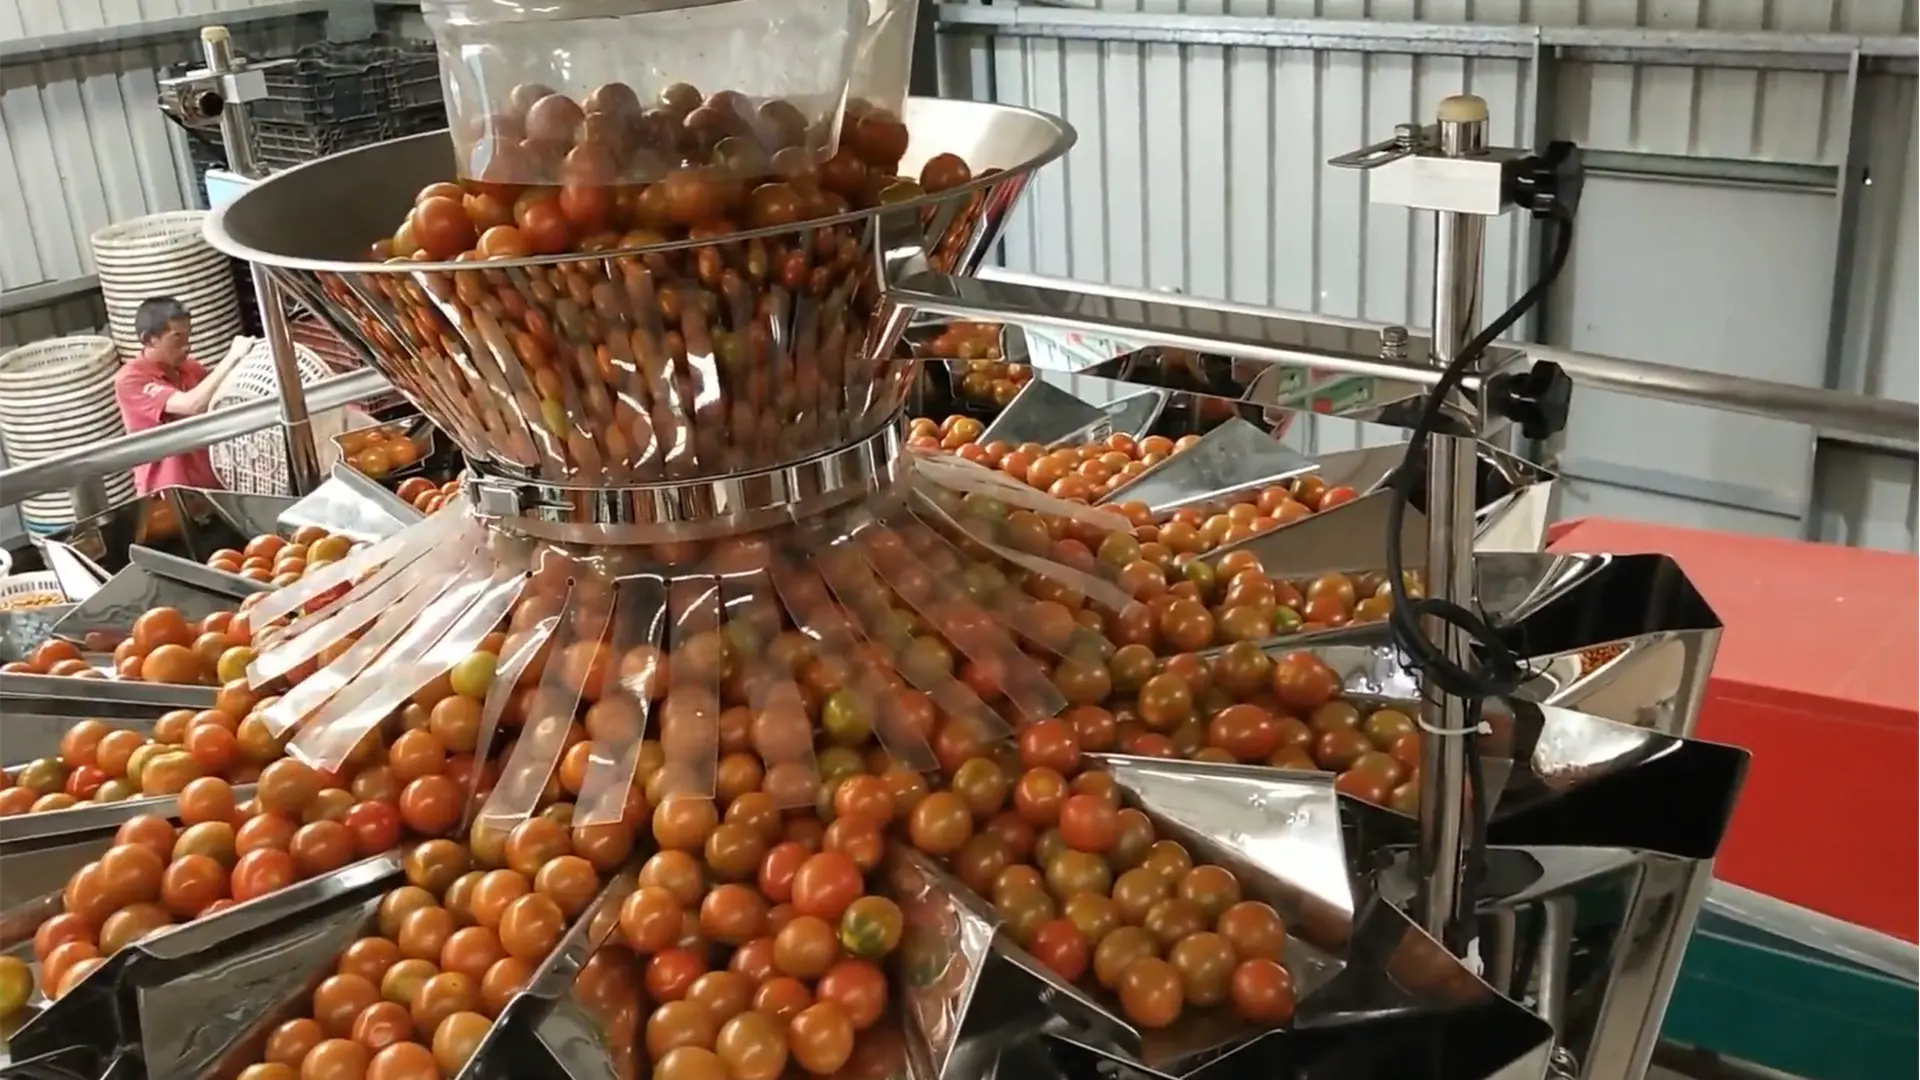 Automatic box packaging machine for tomatoes